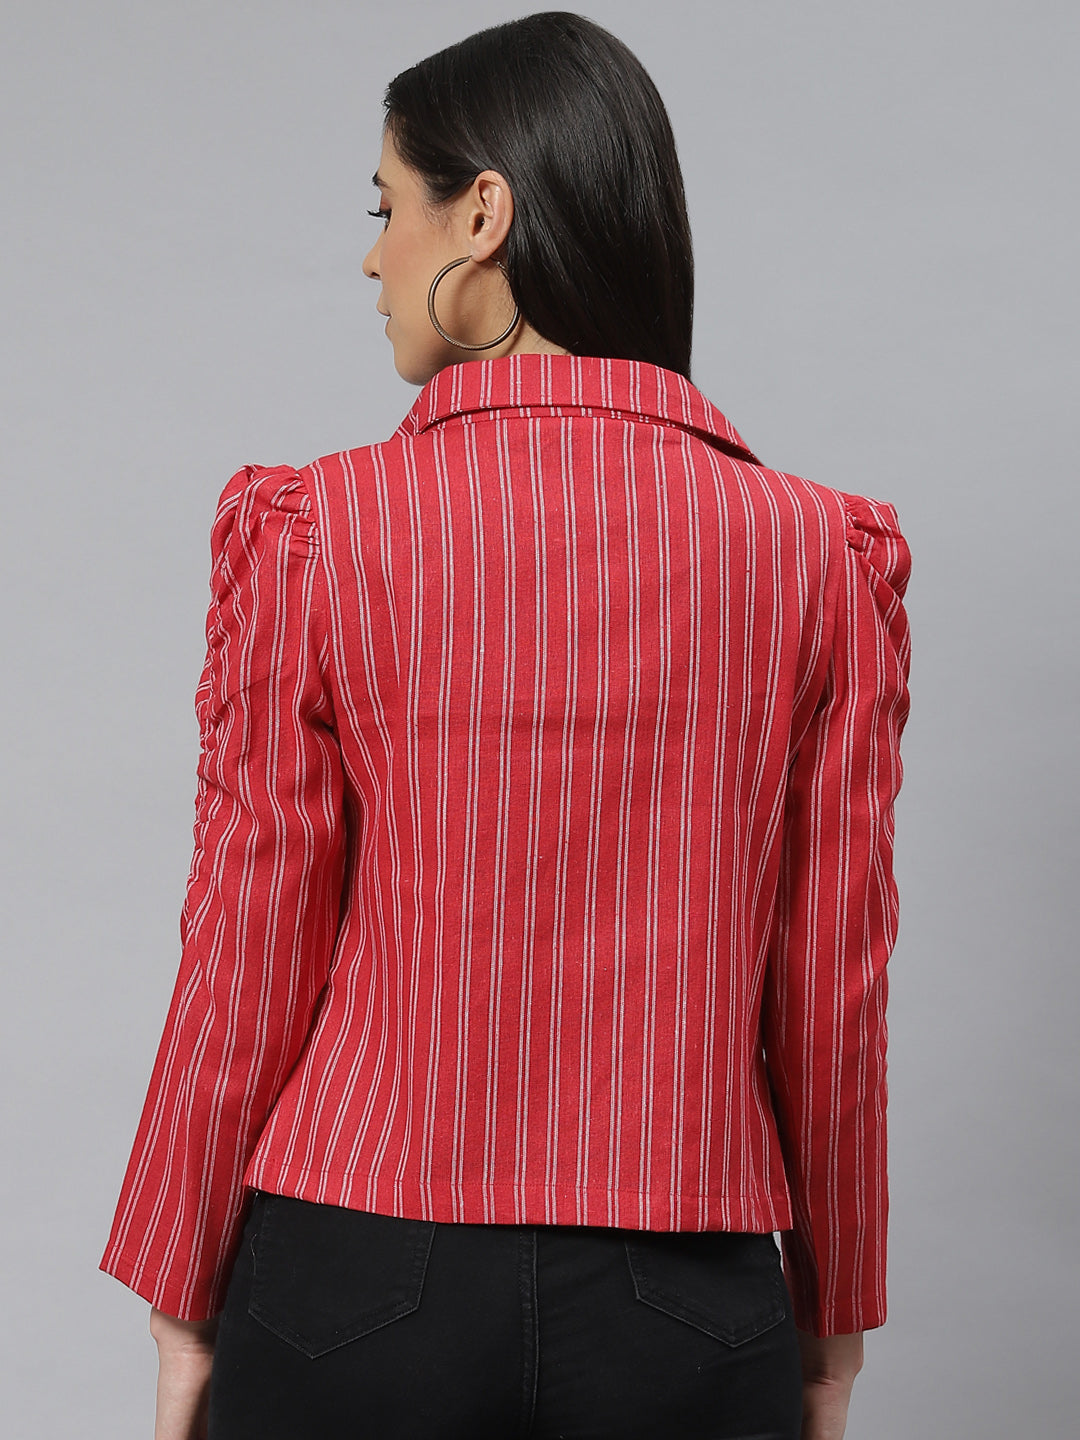 Cottinfab Women Red White Striped Open Front Jacket